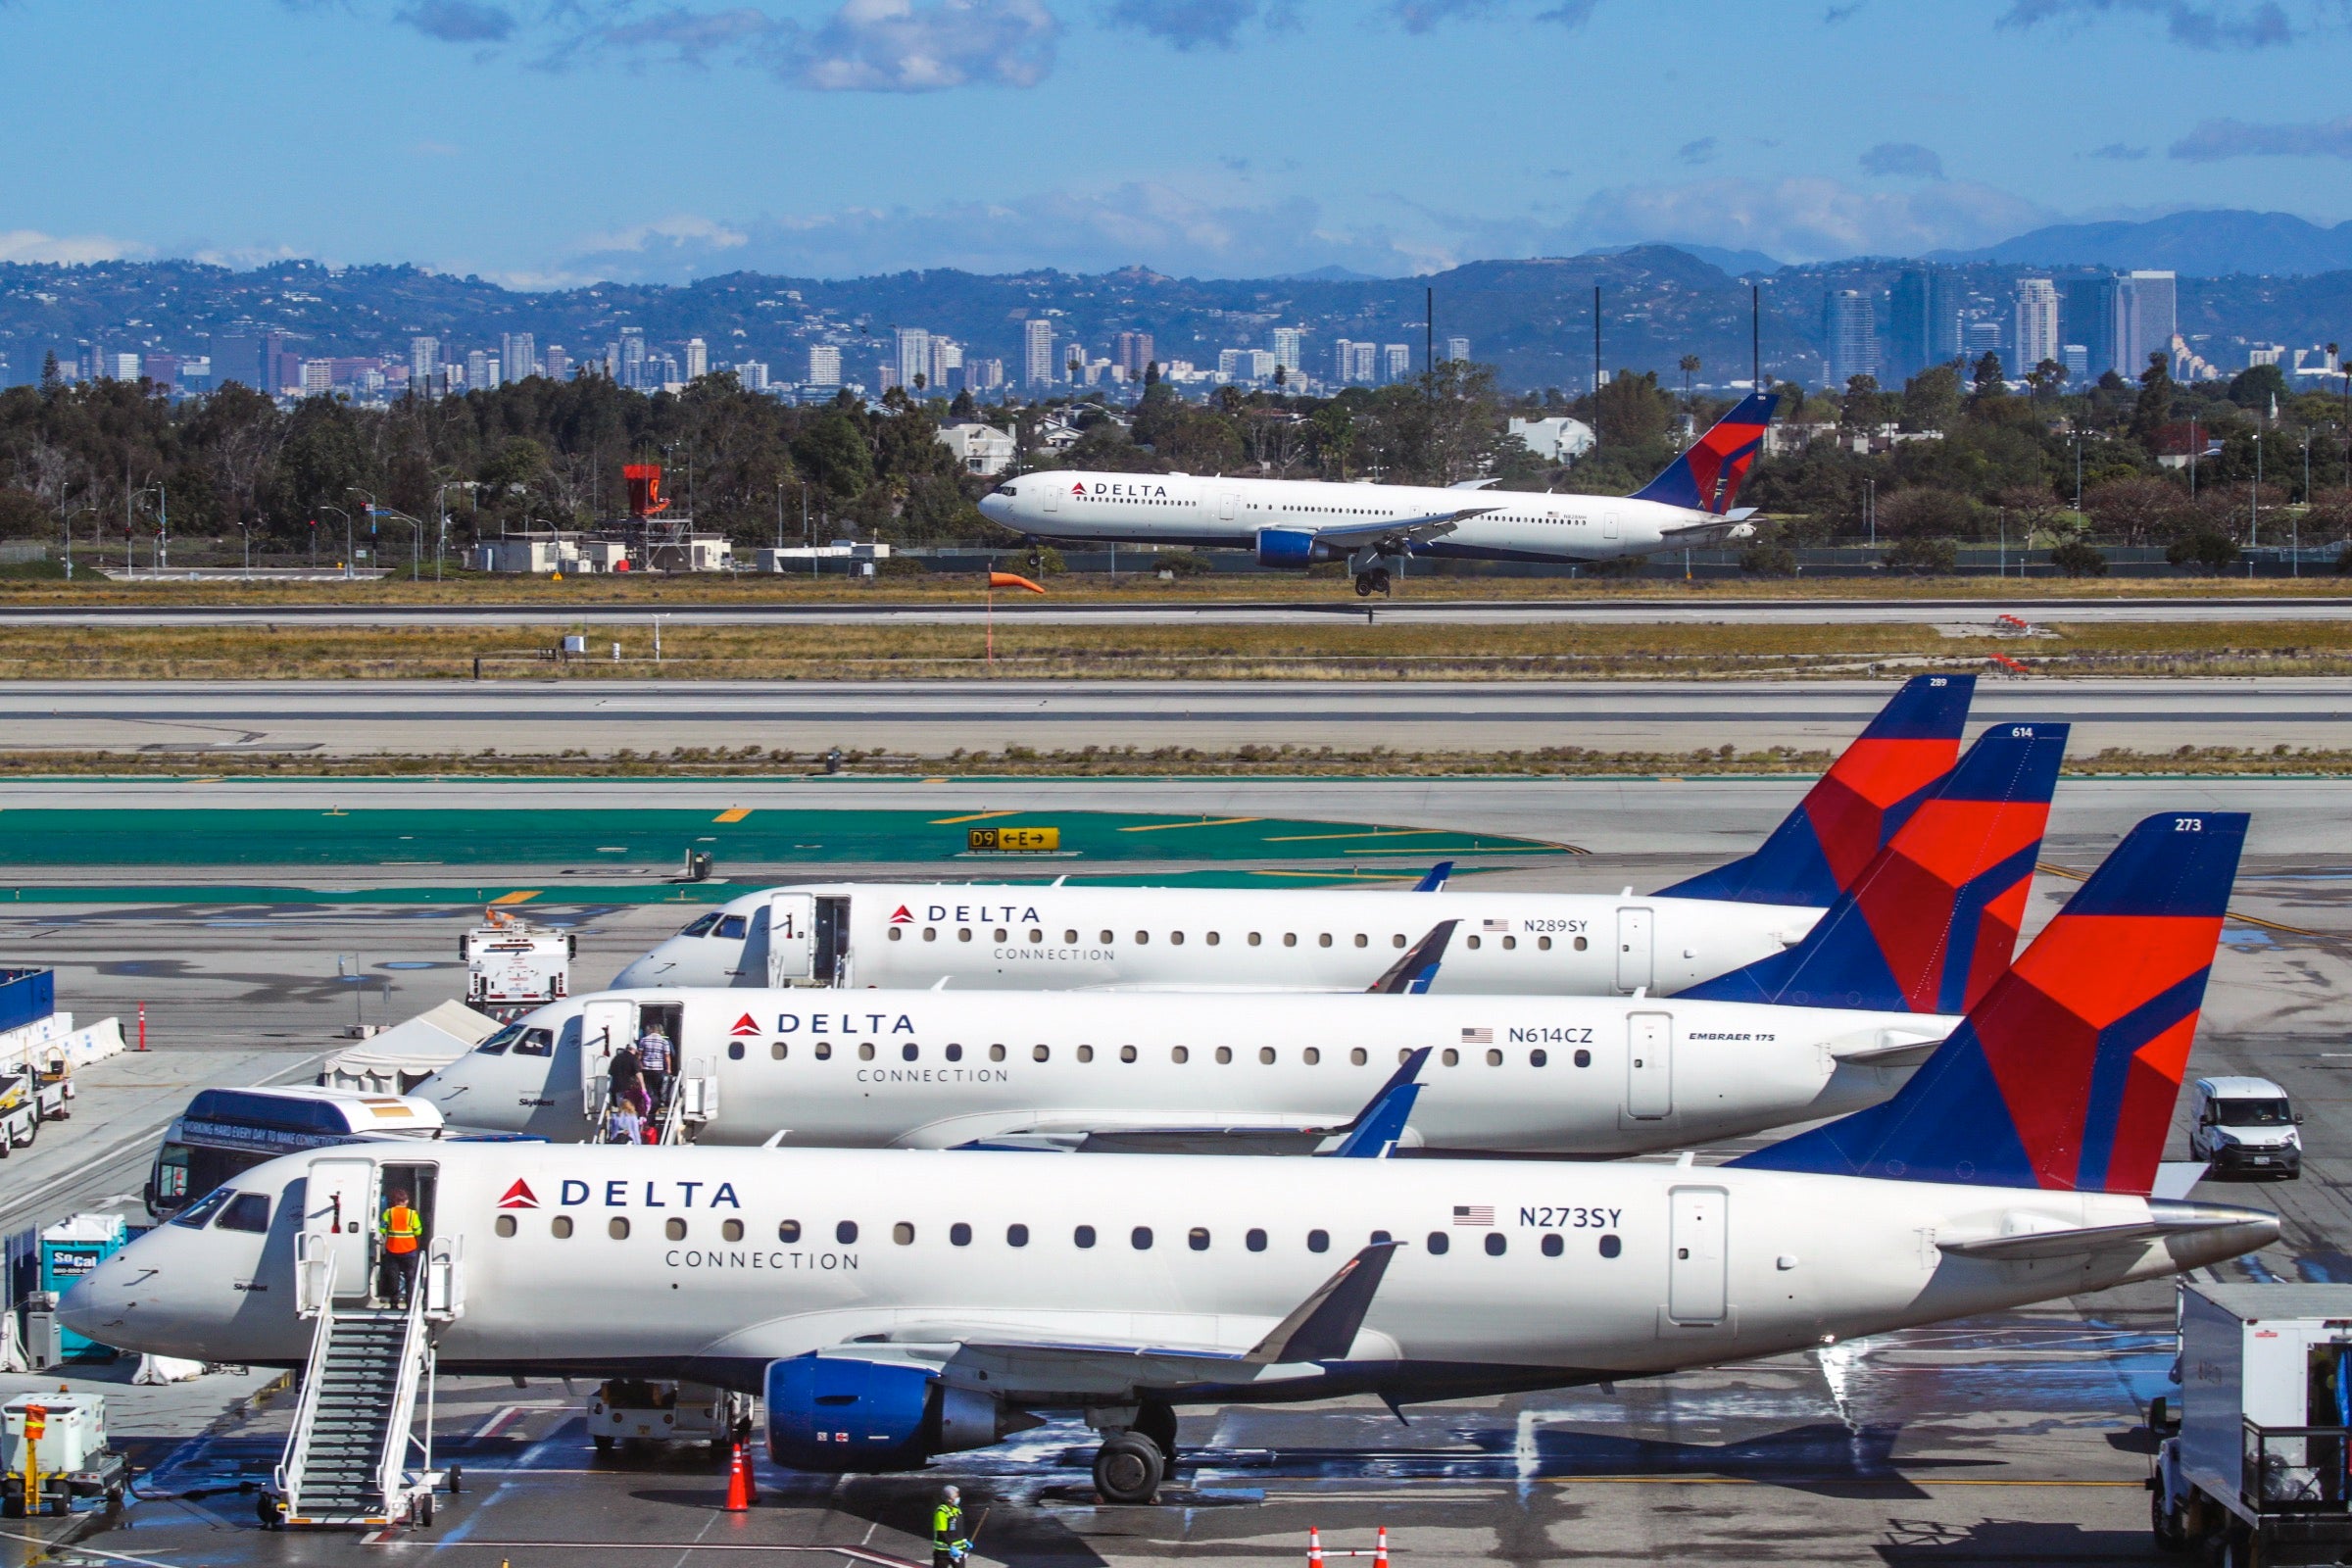 Delta planes on the ground in LAX